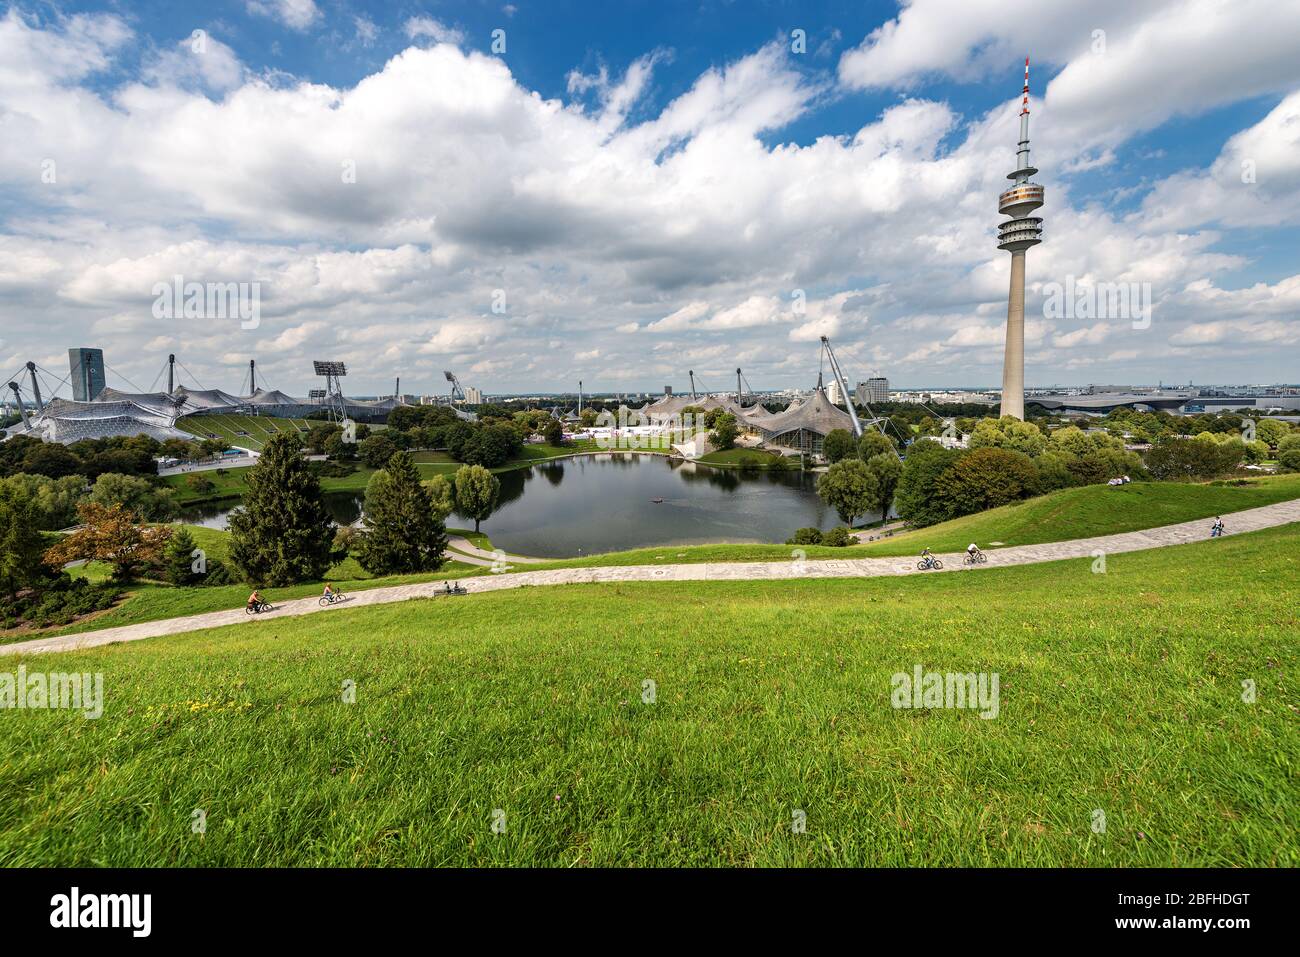 Panoramic view of the Olympic Park in Munich, Germany (Olympiapark) with the Olympic Tower (Olympiaturm). Bavaria, Germany, Europe Stock Photo